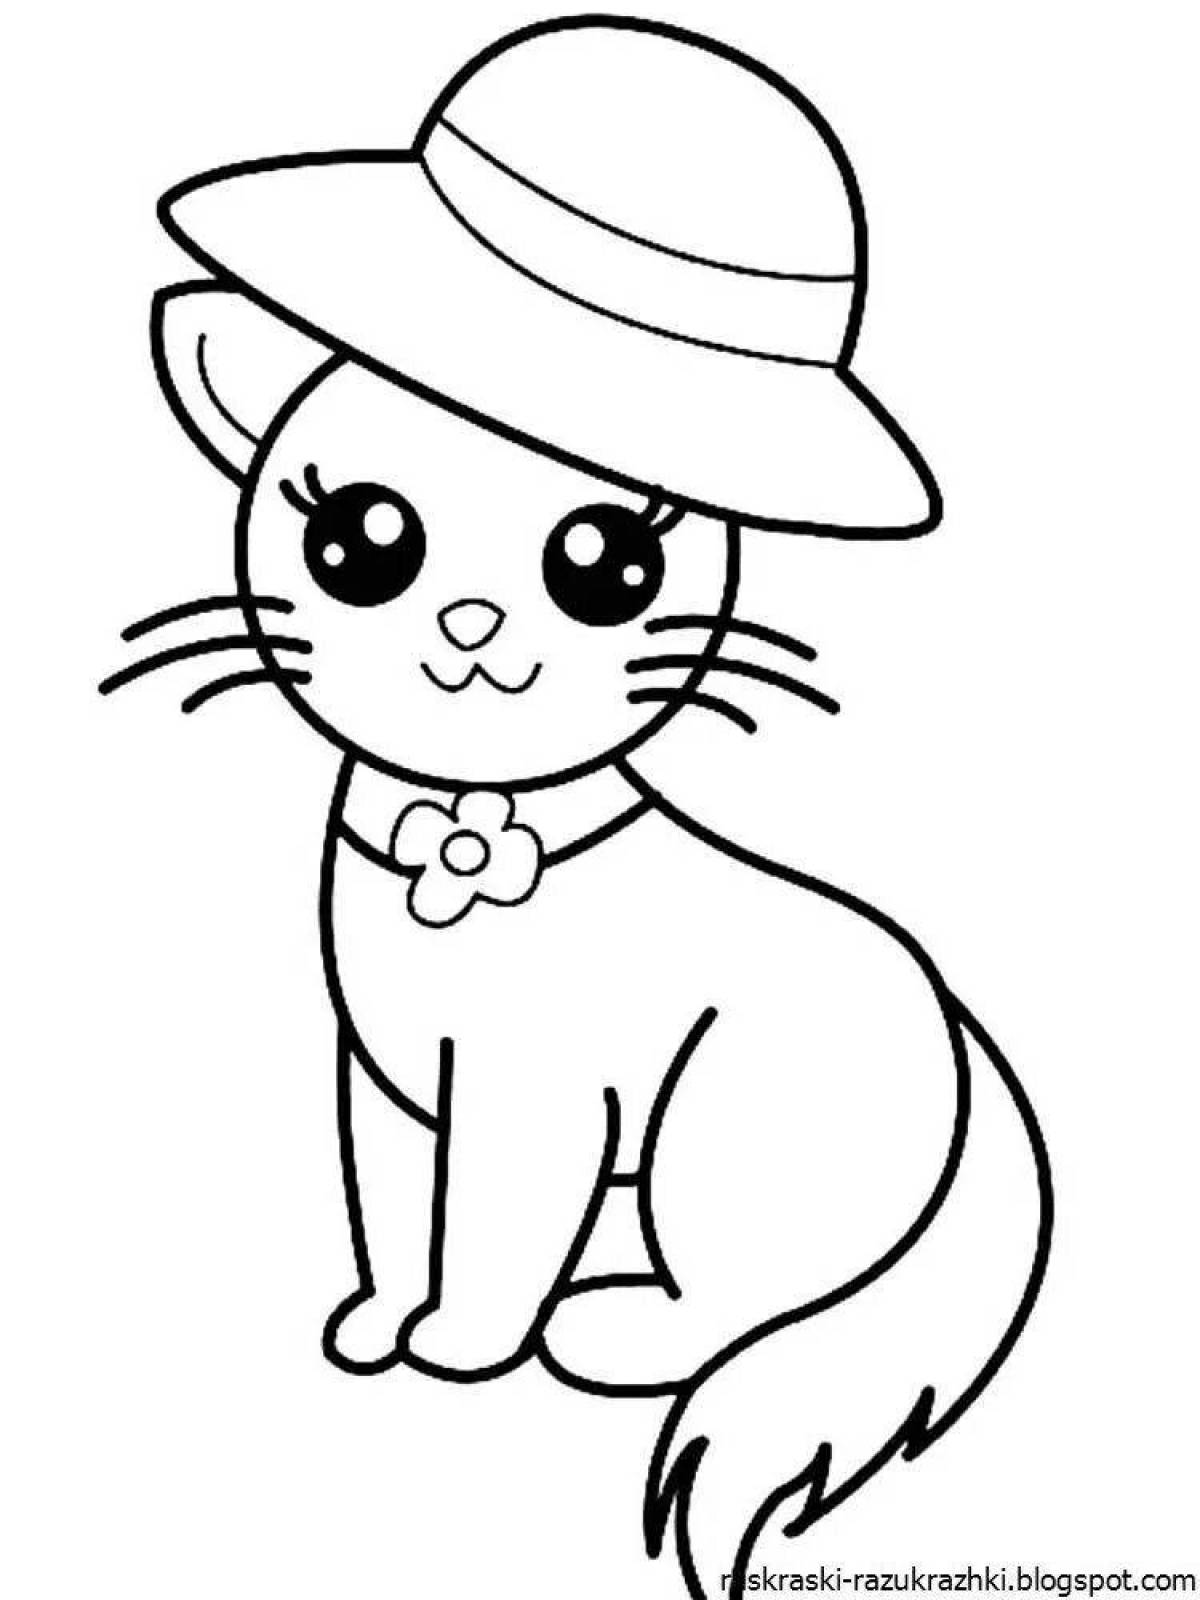 Kittens coloring book for kids 5-6 years old